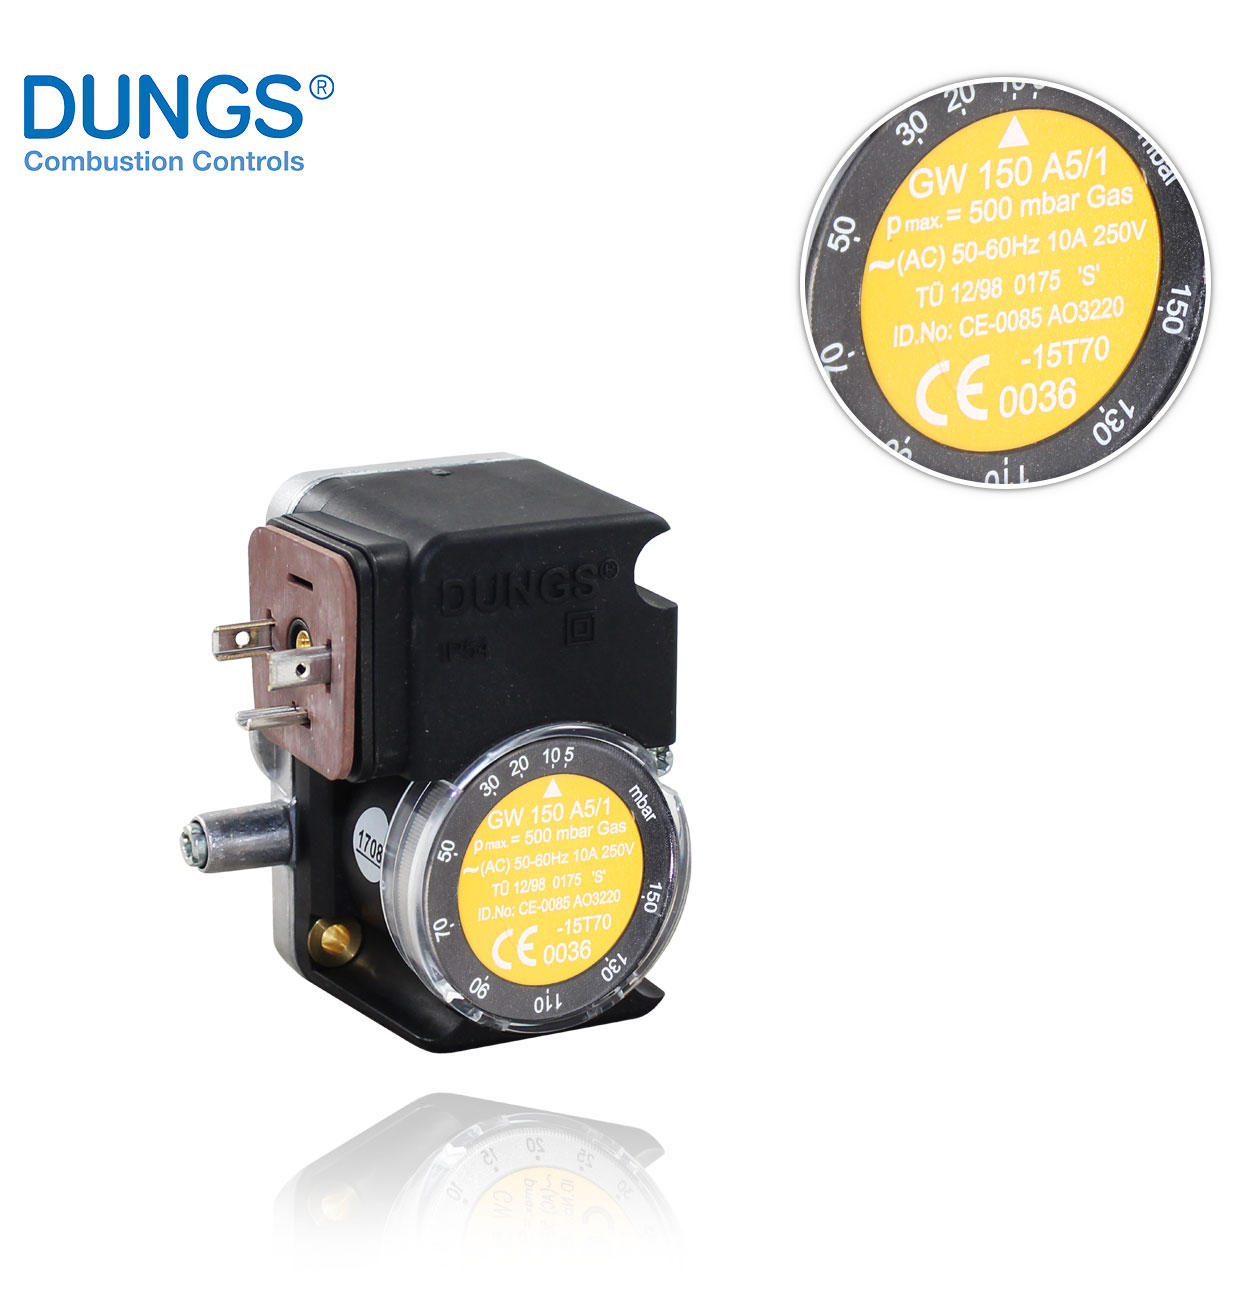 GW   150 A5/1  PRESSURE SWITCH DUNGS